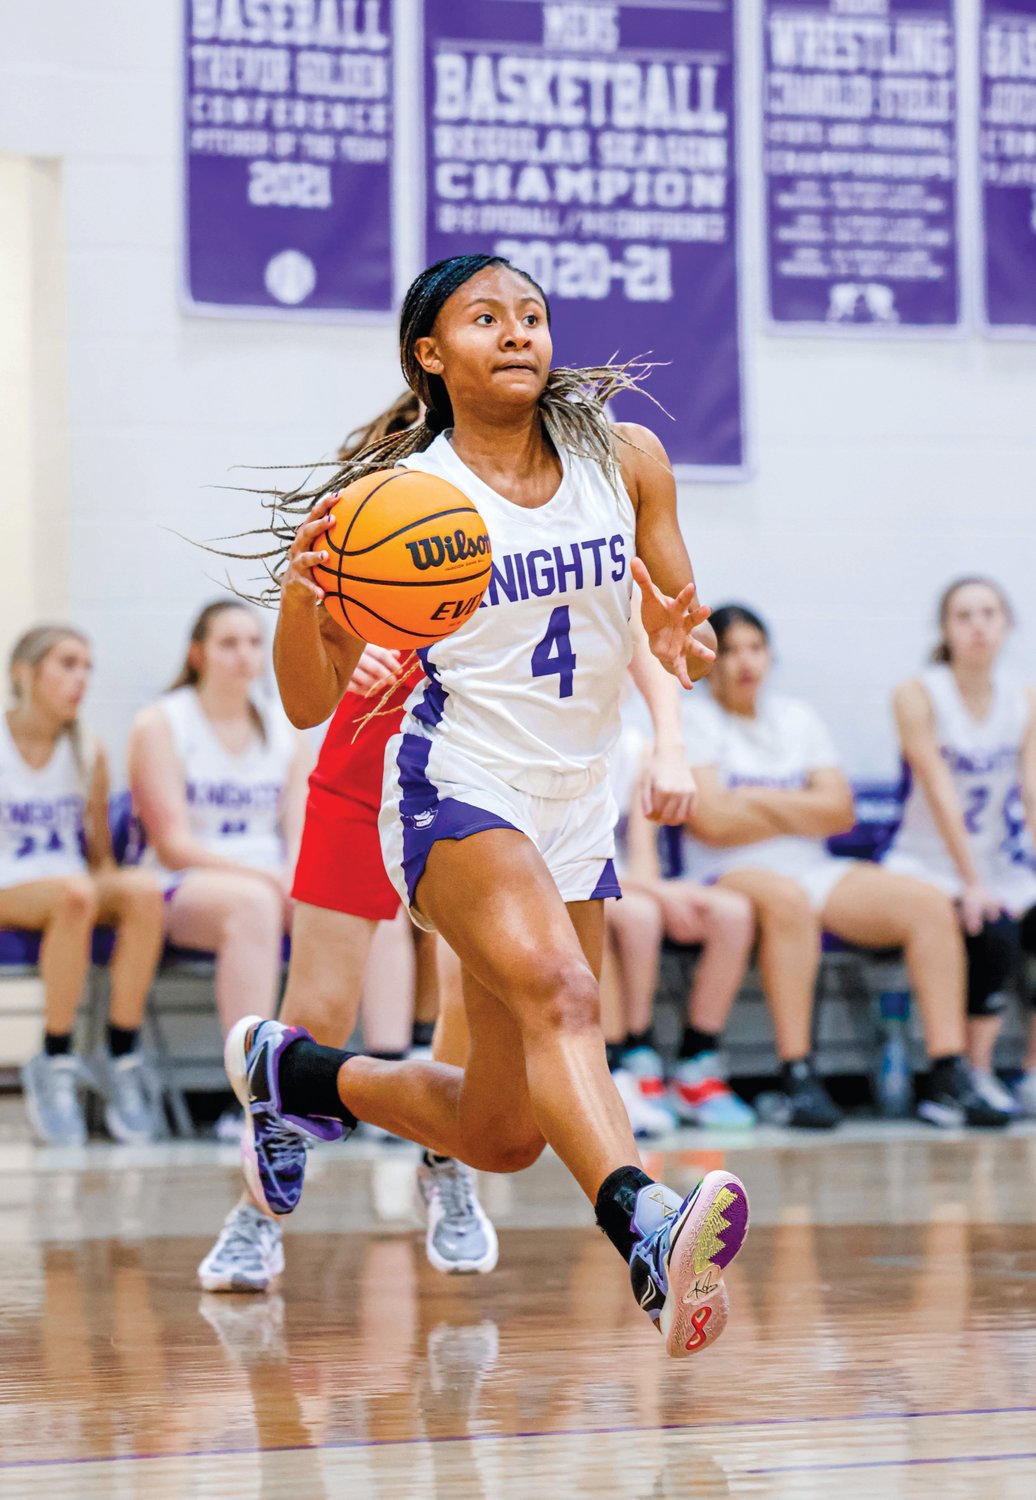 Chatham Charter senior Tamaya Walden reached 1,500 career points with a 30-point outing against Woods Charter last Friday.